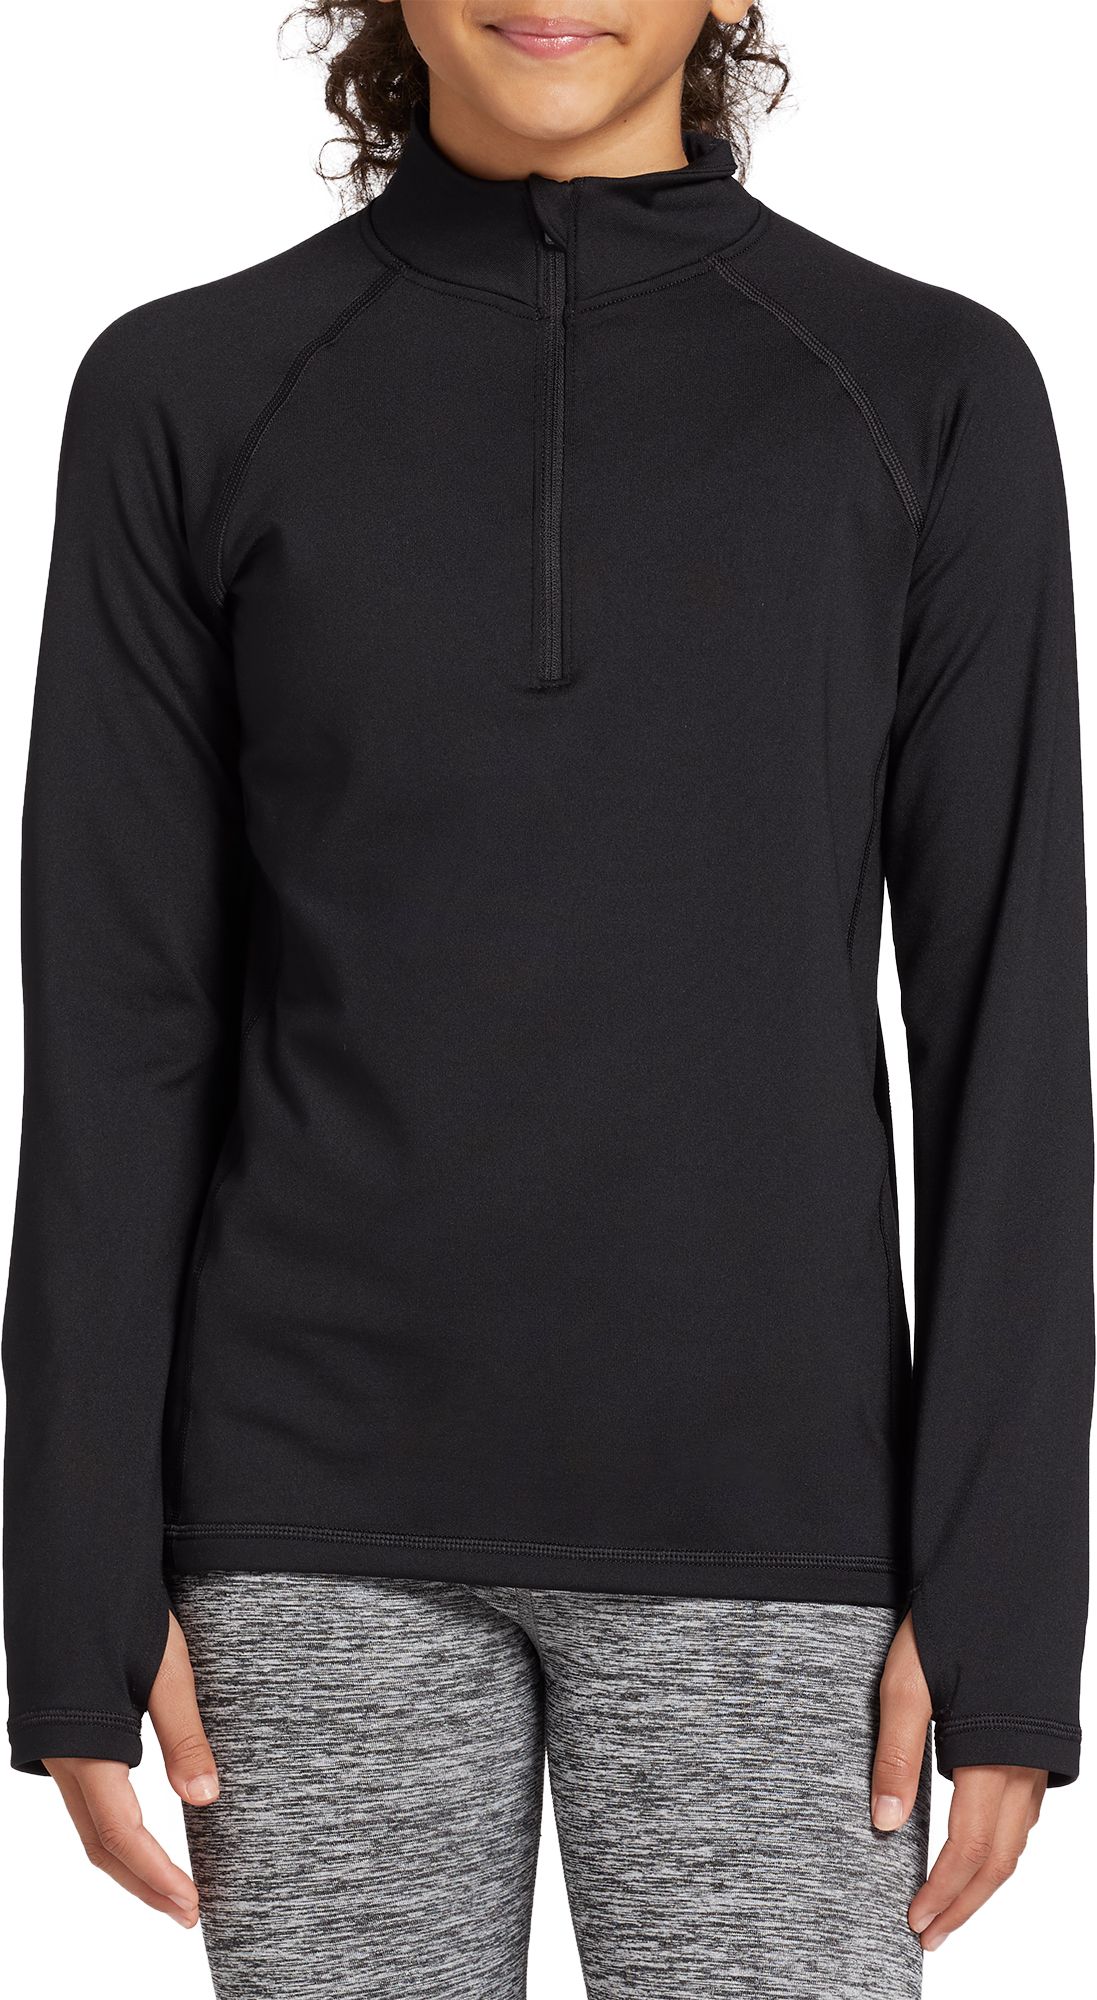 DSG Youth Cold Weather Compression 1/4 Zip Jacket